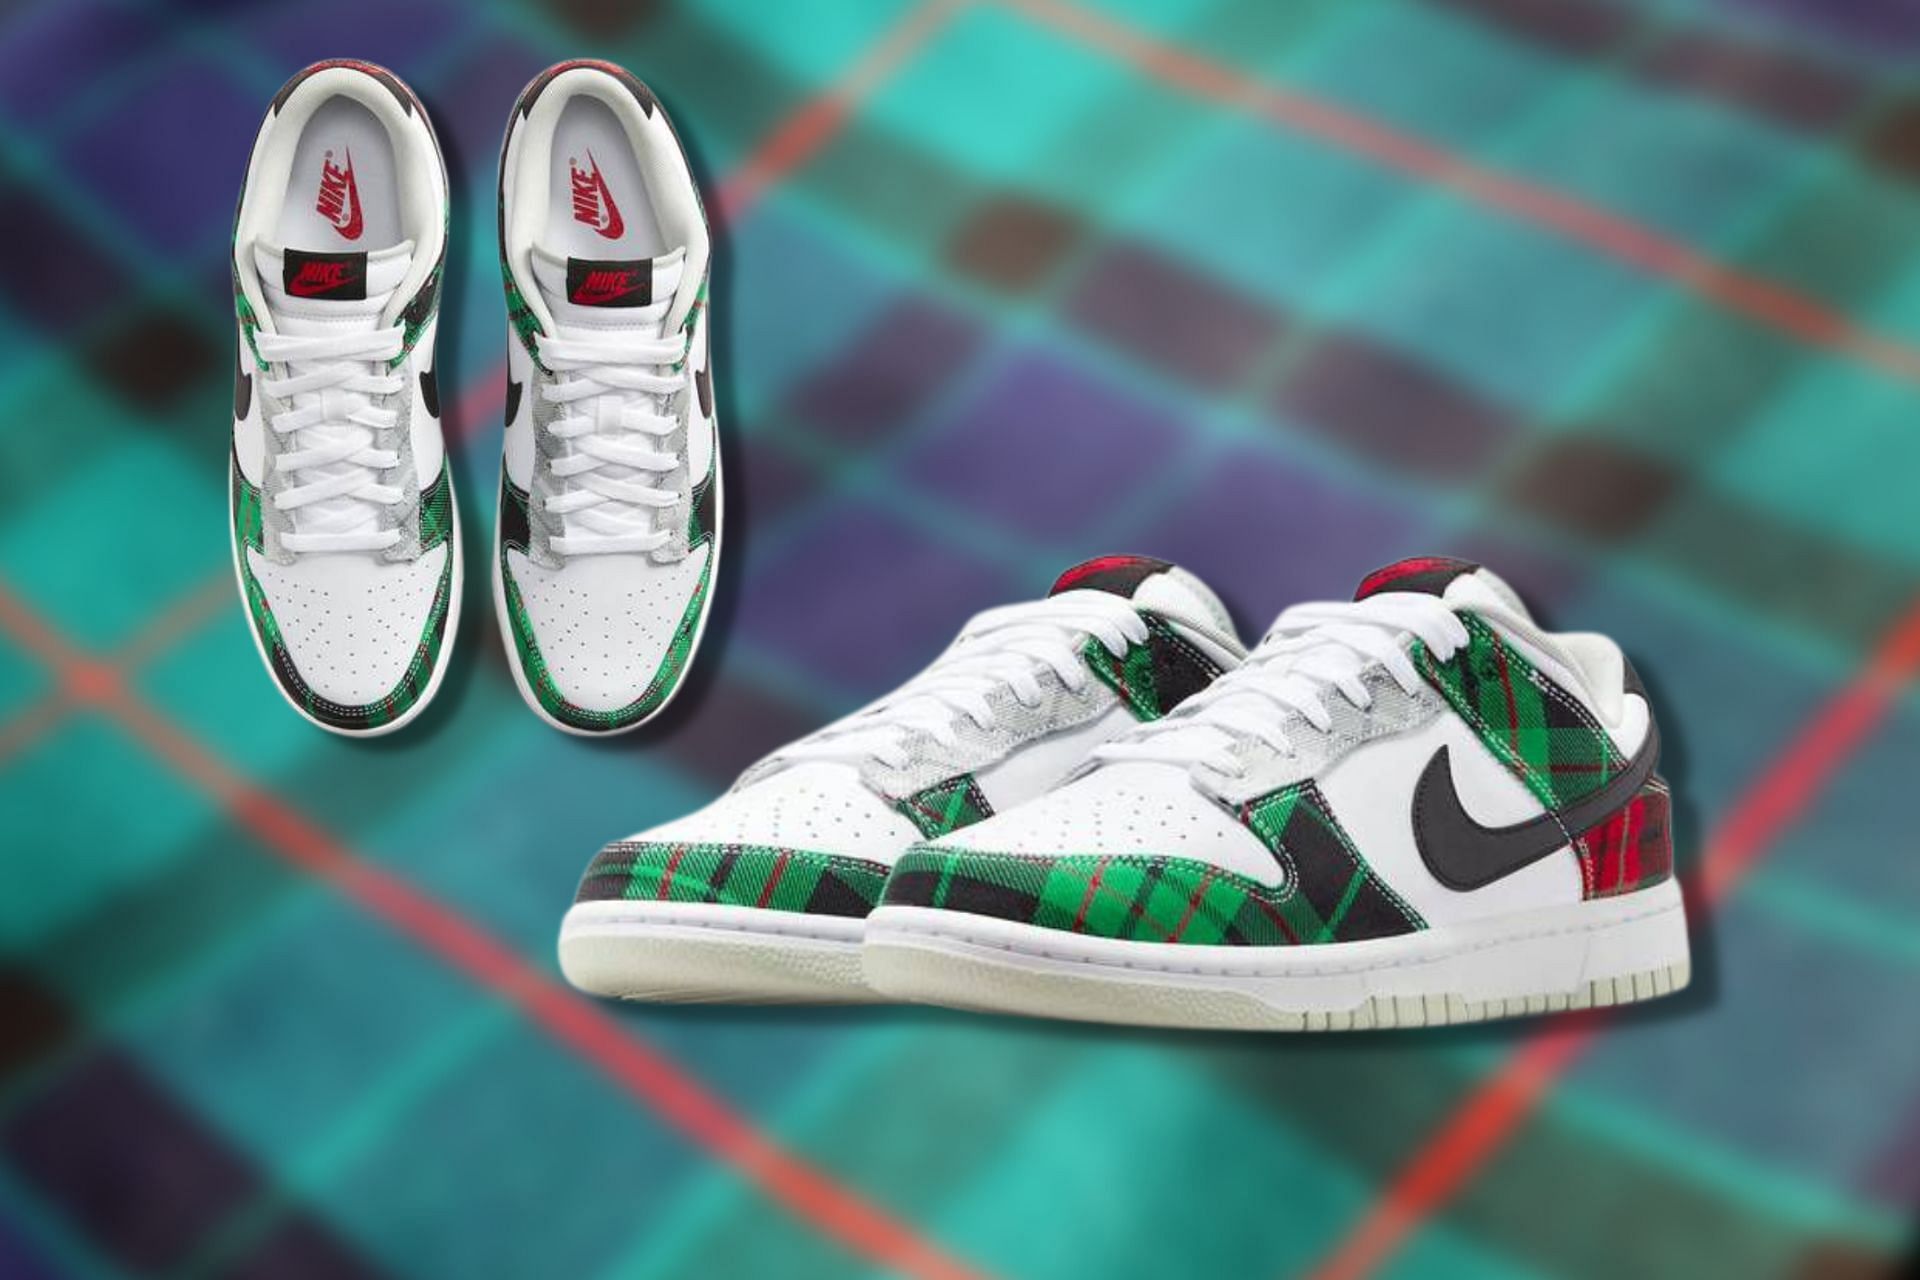 Where university red dunk low to buy Nike Dunk Low Plaid shoes? Price and more details